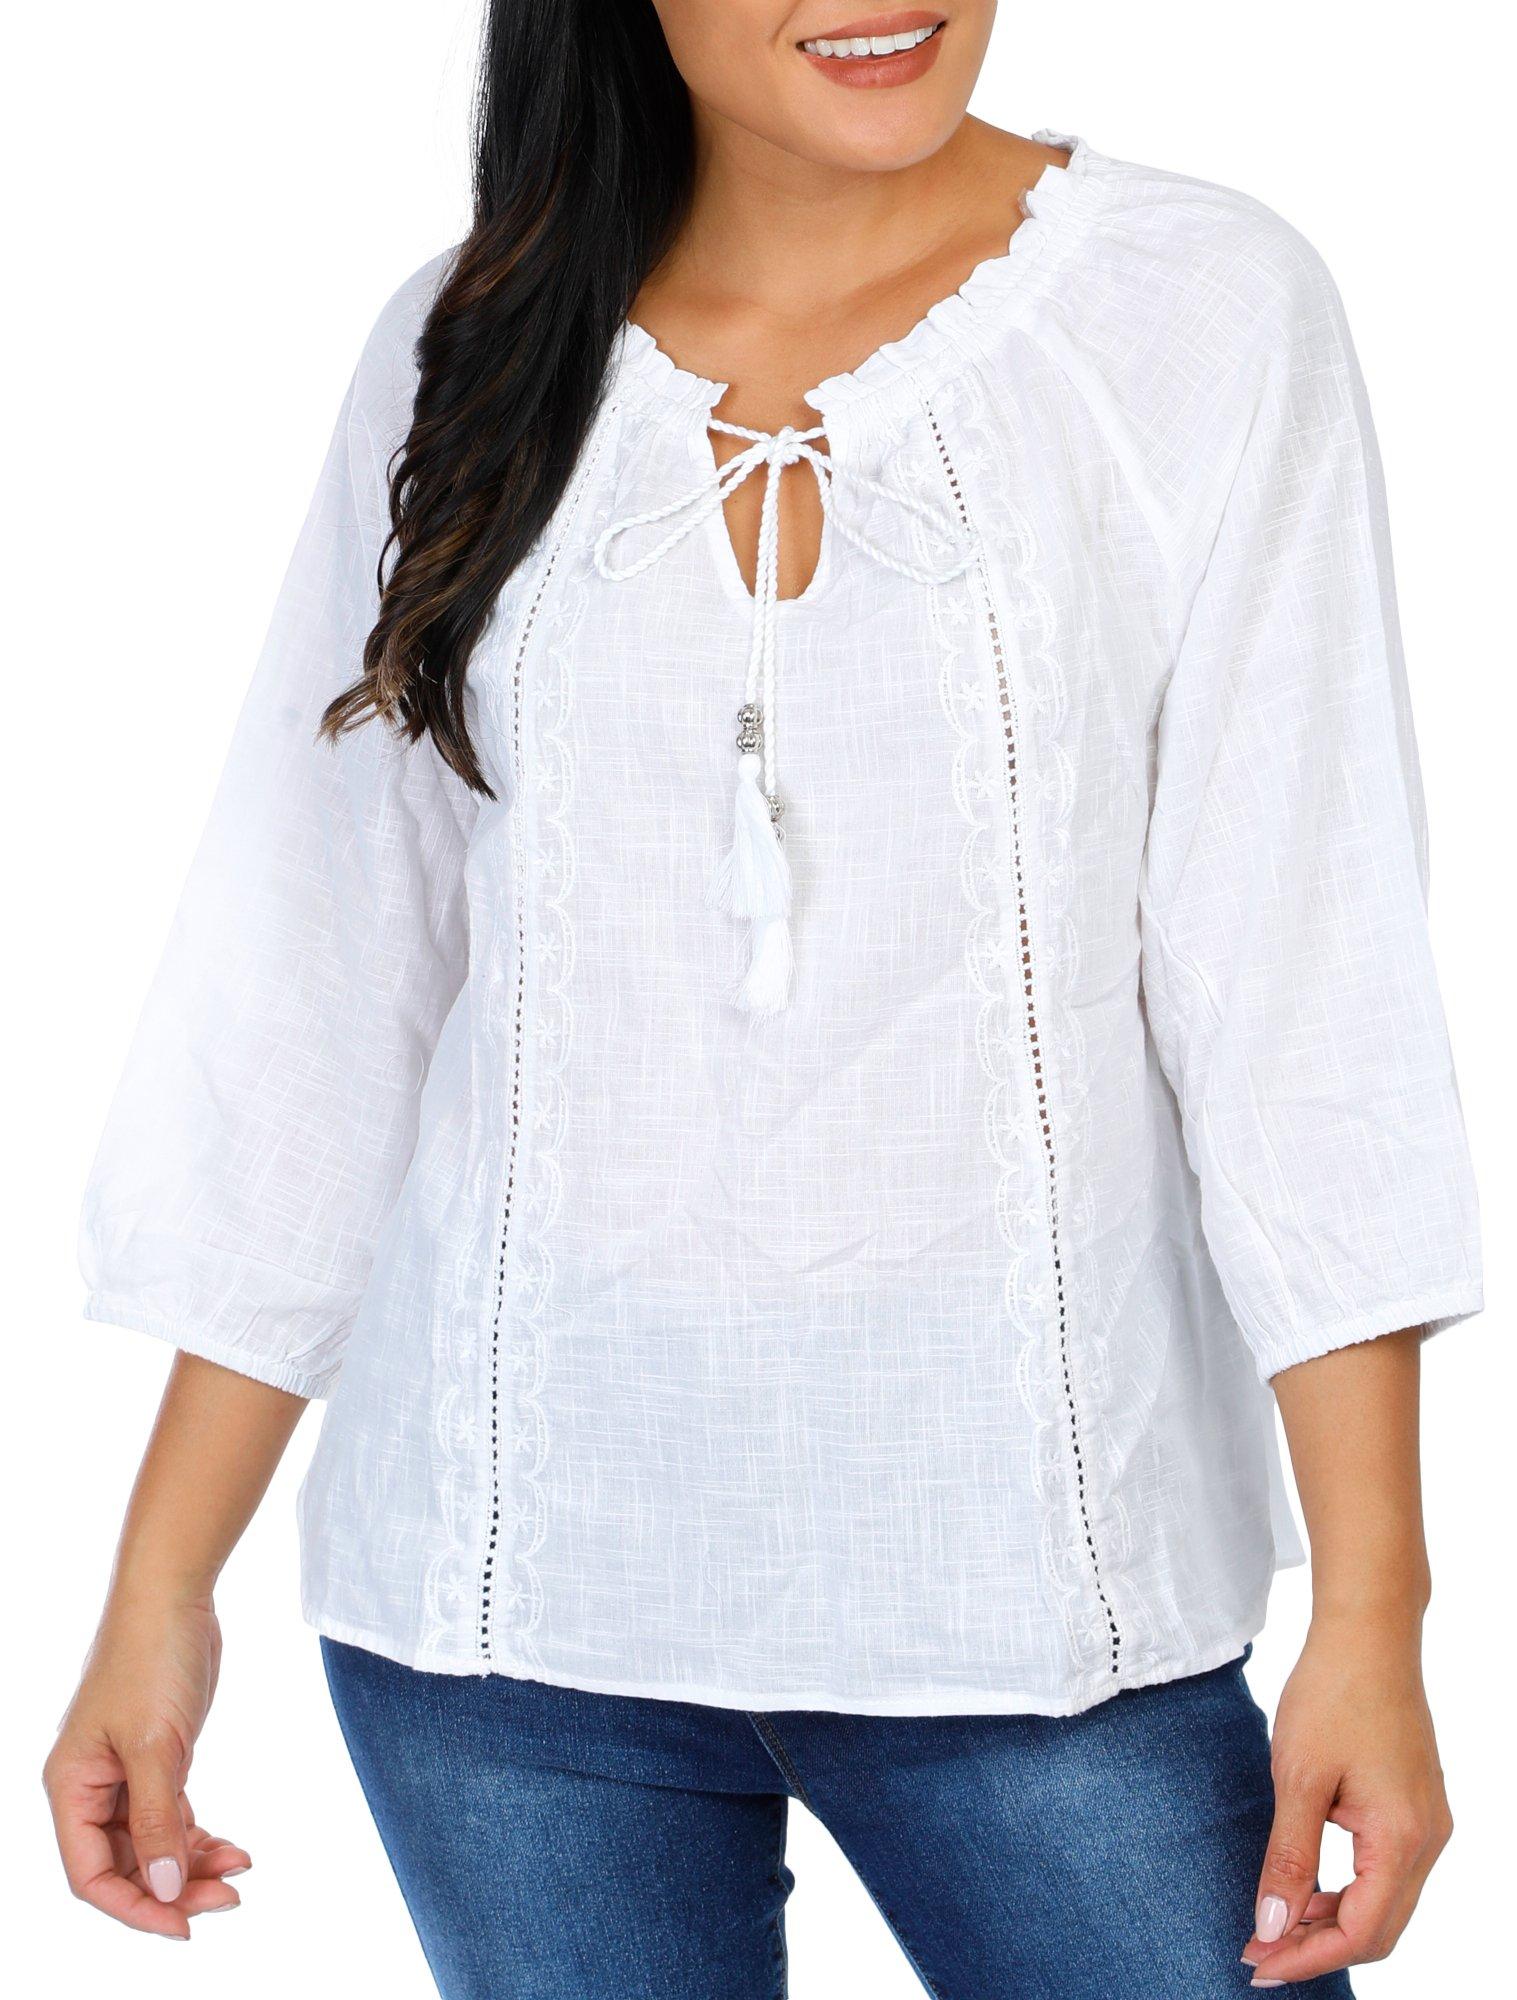 Women's Solid Peasant Blouse